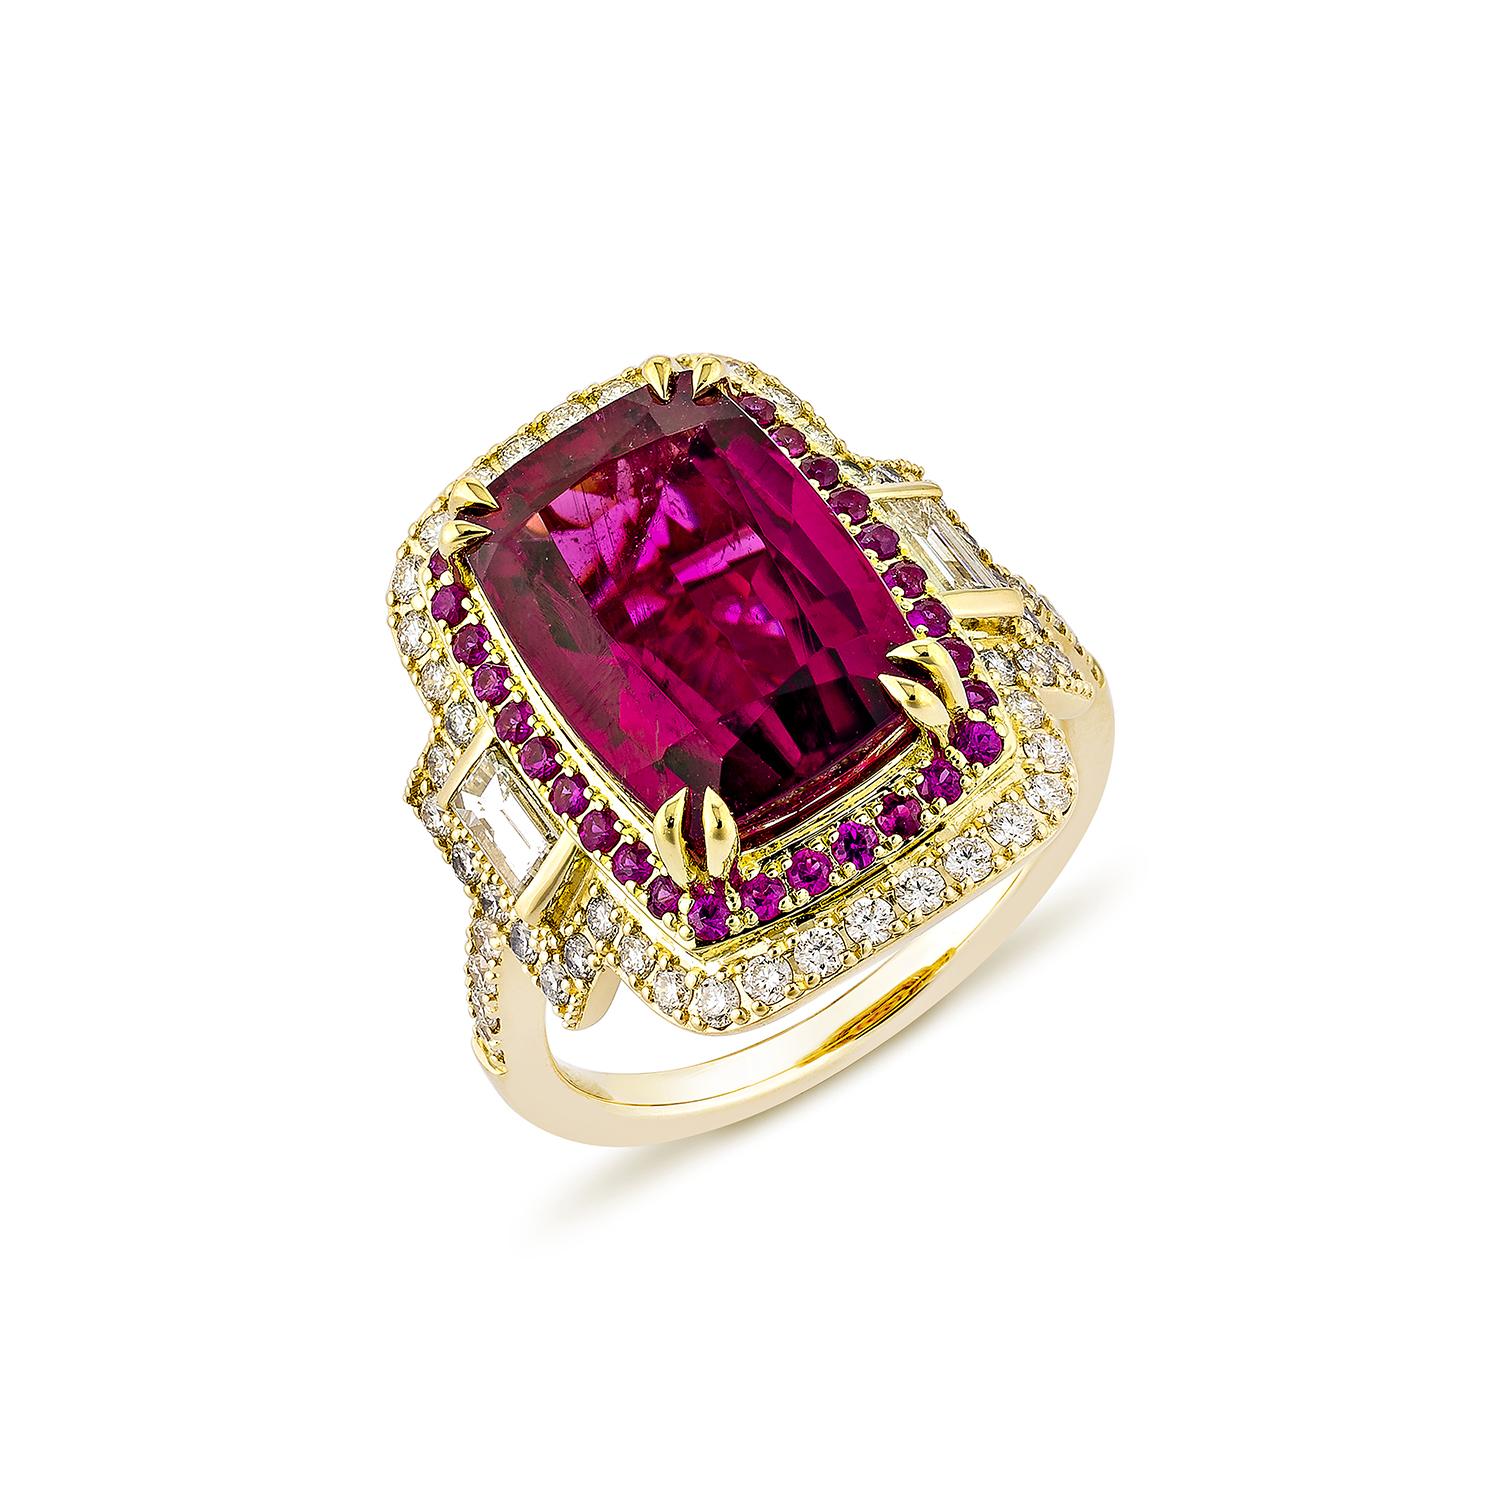 Contemporary 6.37 Carat Rubellite Cocktail Ring in 18Karat Yellow Gold with Ruby and Diamond. For Sale